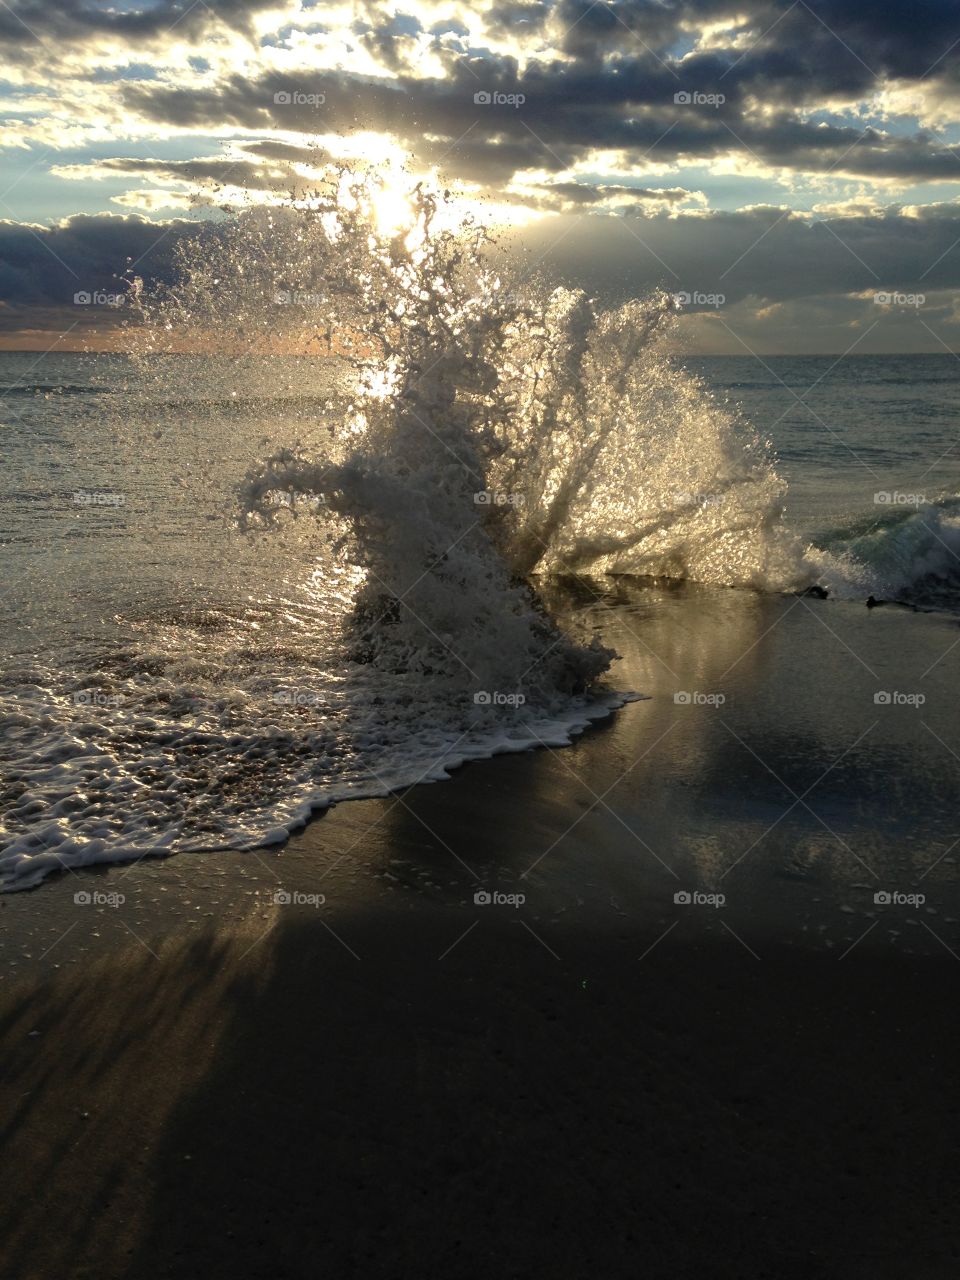 This was taken during sunrise as the waves crashed by the shore creating a magnificent image